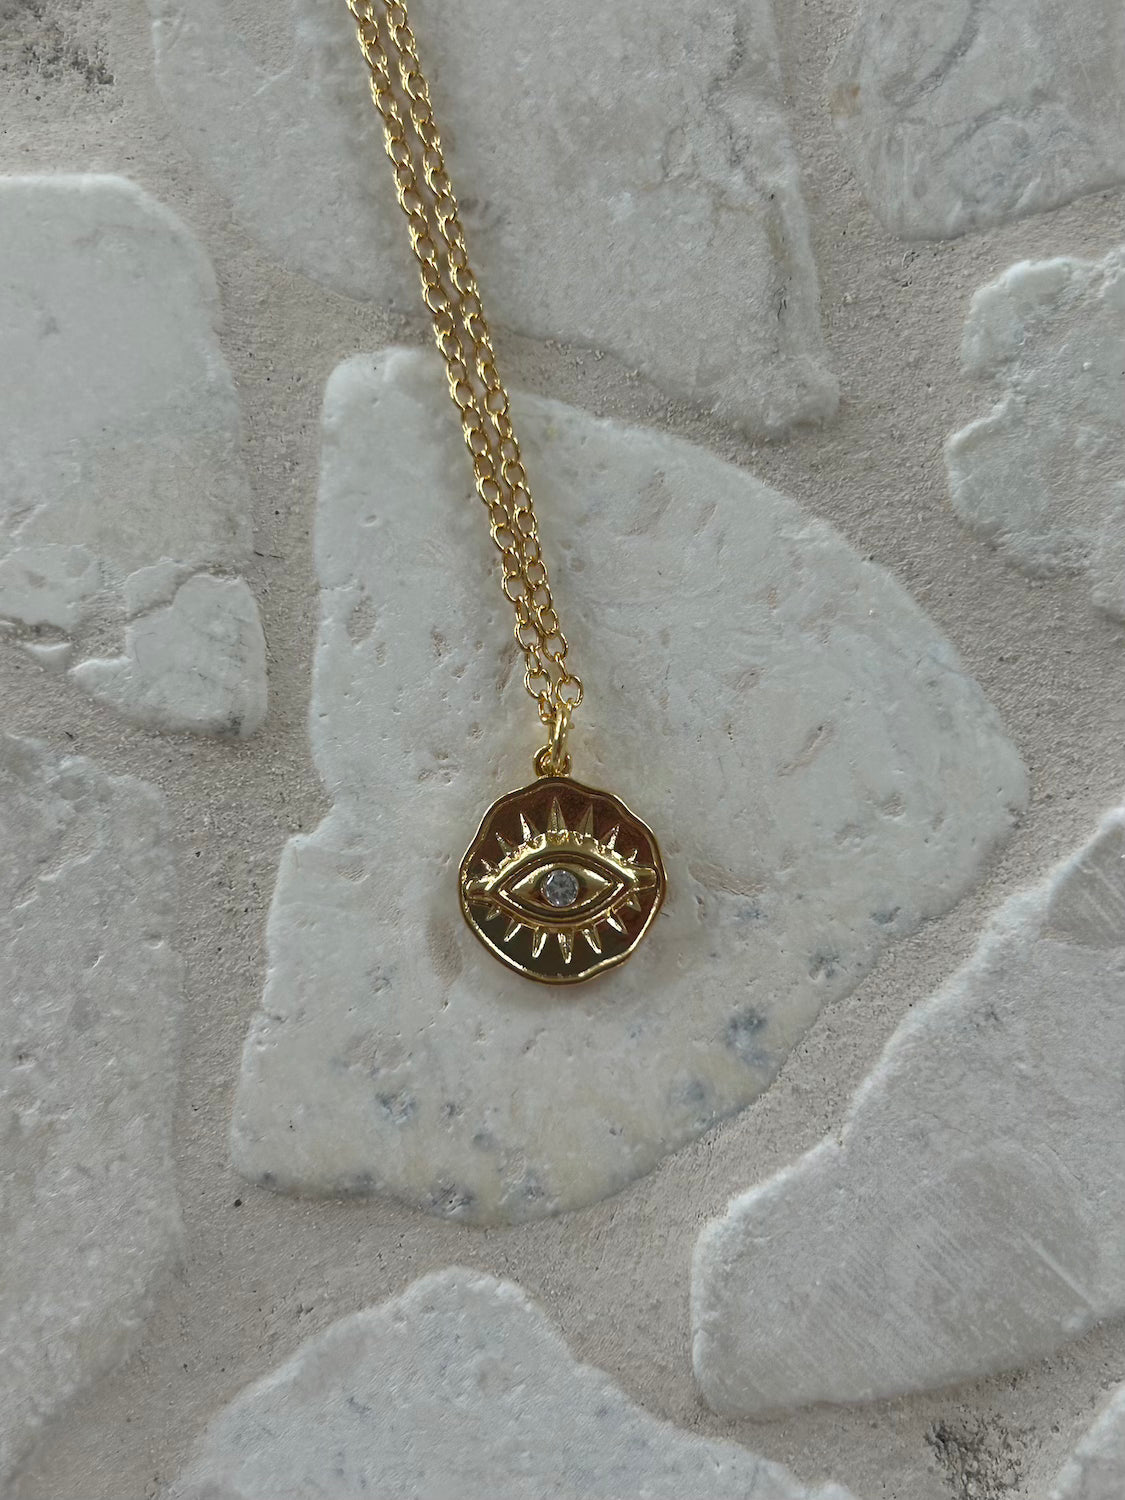 Nirvana Necklace - 18k Gold plated evil eye pendant on chain